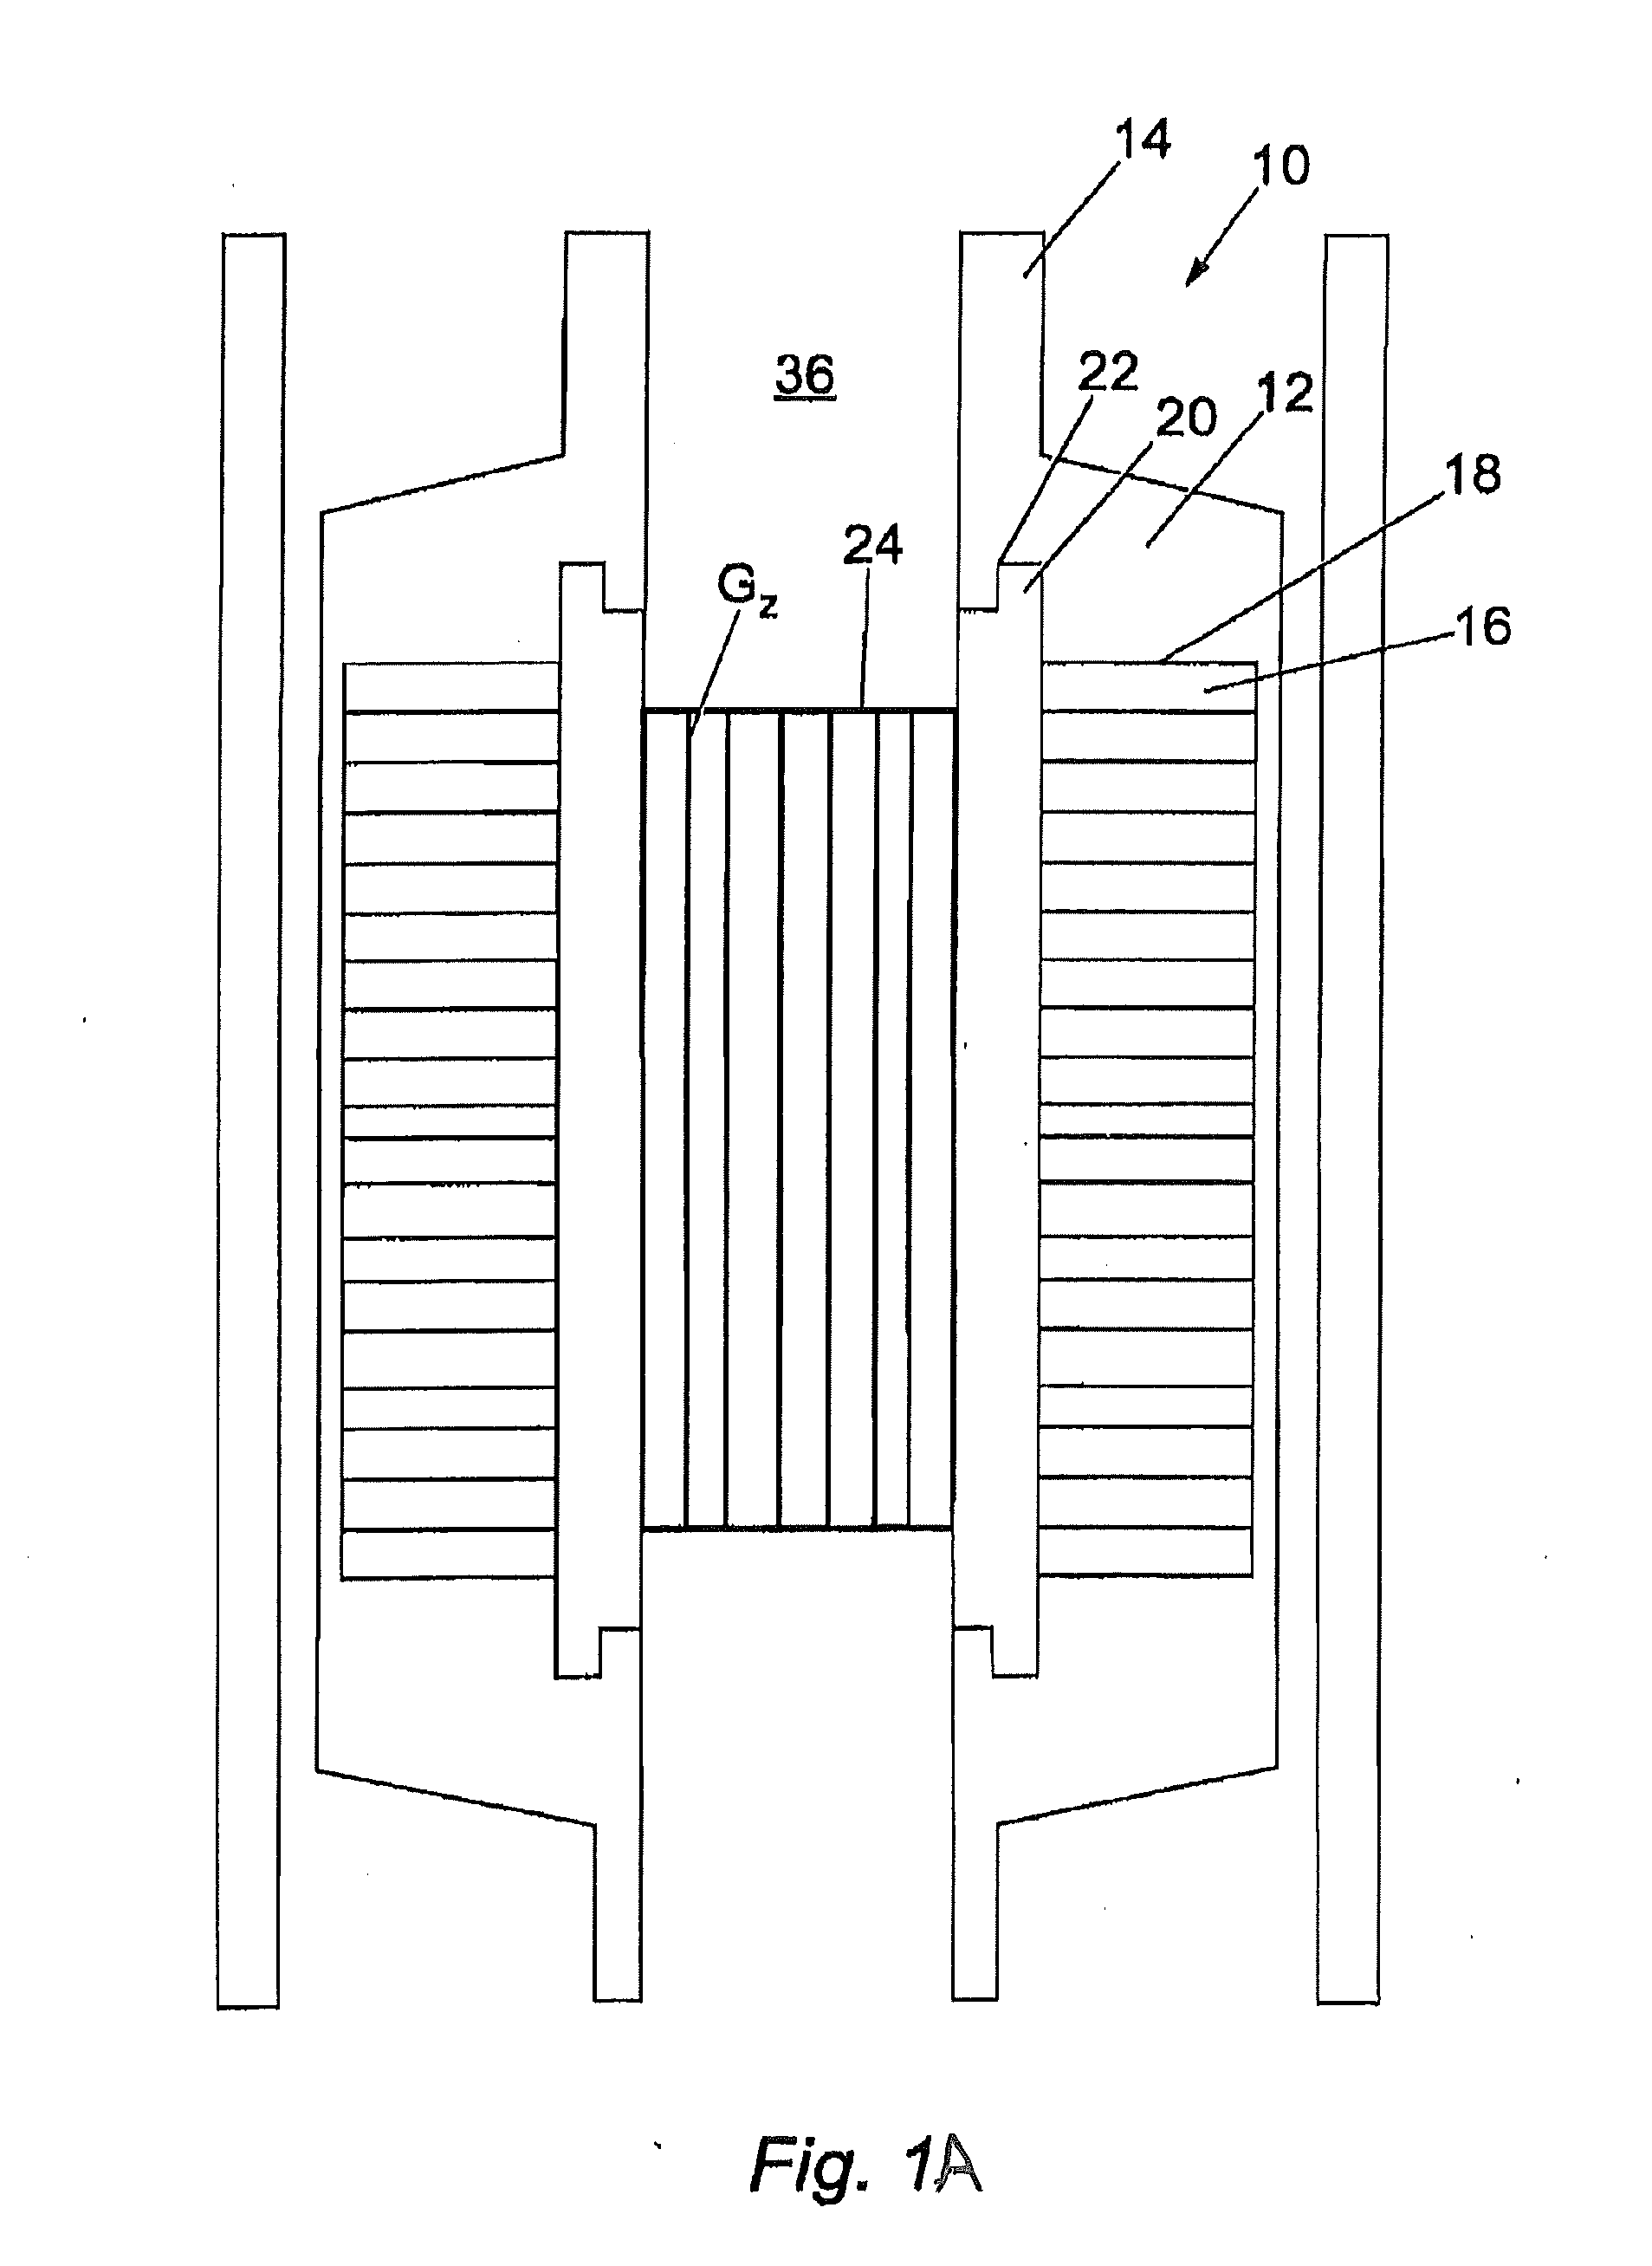 Design and Apparatus of a Magnetic Resonance Multiphase Flow Meter